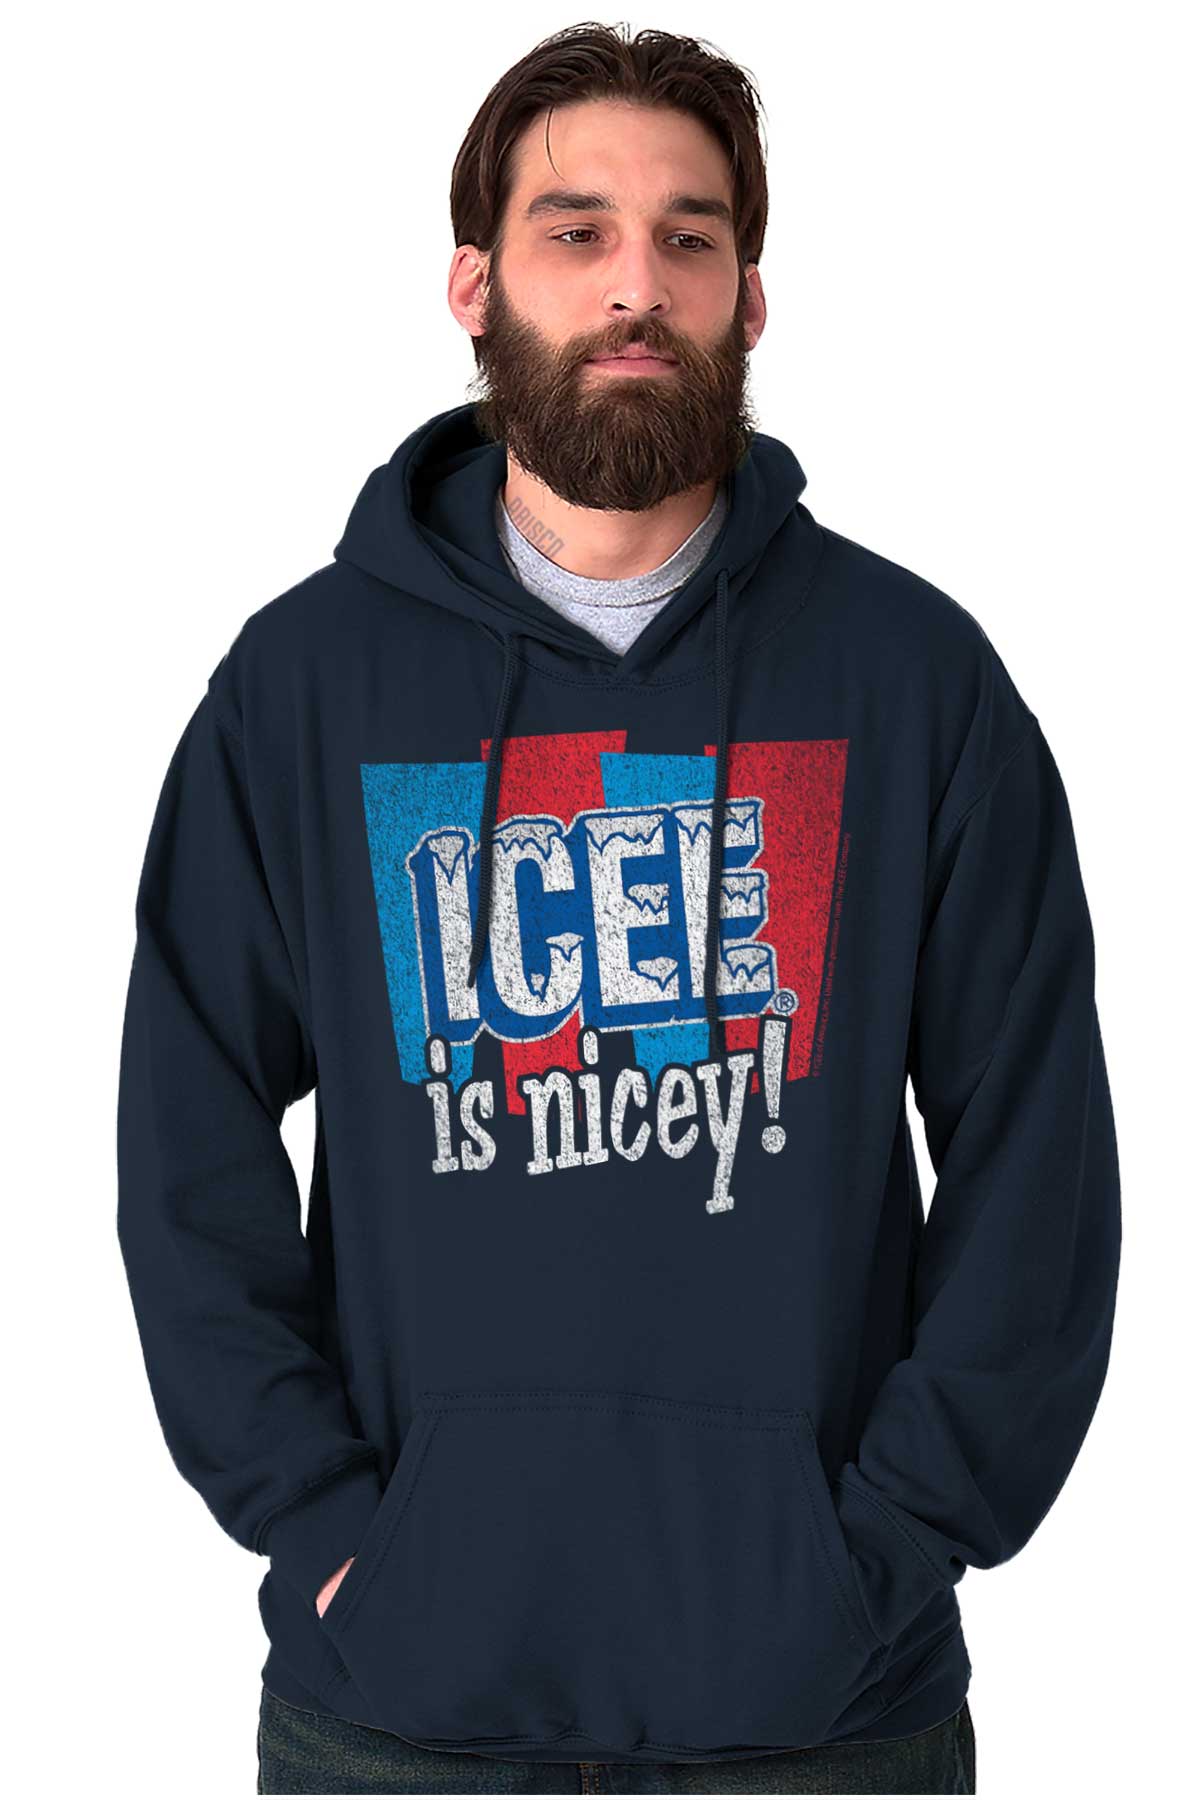 Officially Licensed Icee Logo Novelty Graphic Adult Long Sleeve Hoodie ...